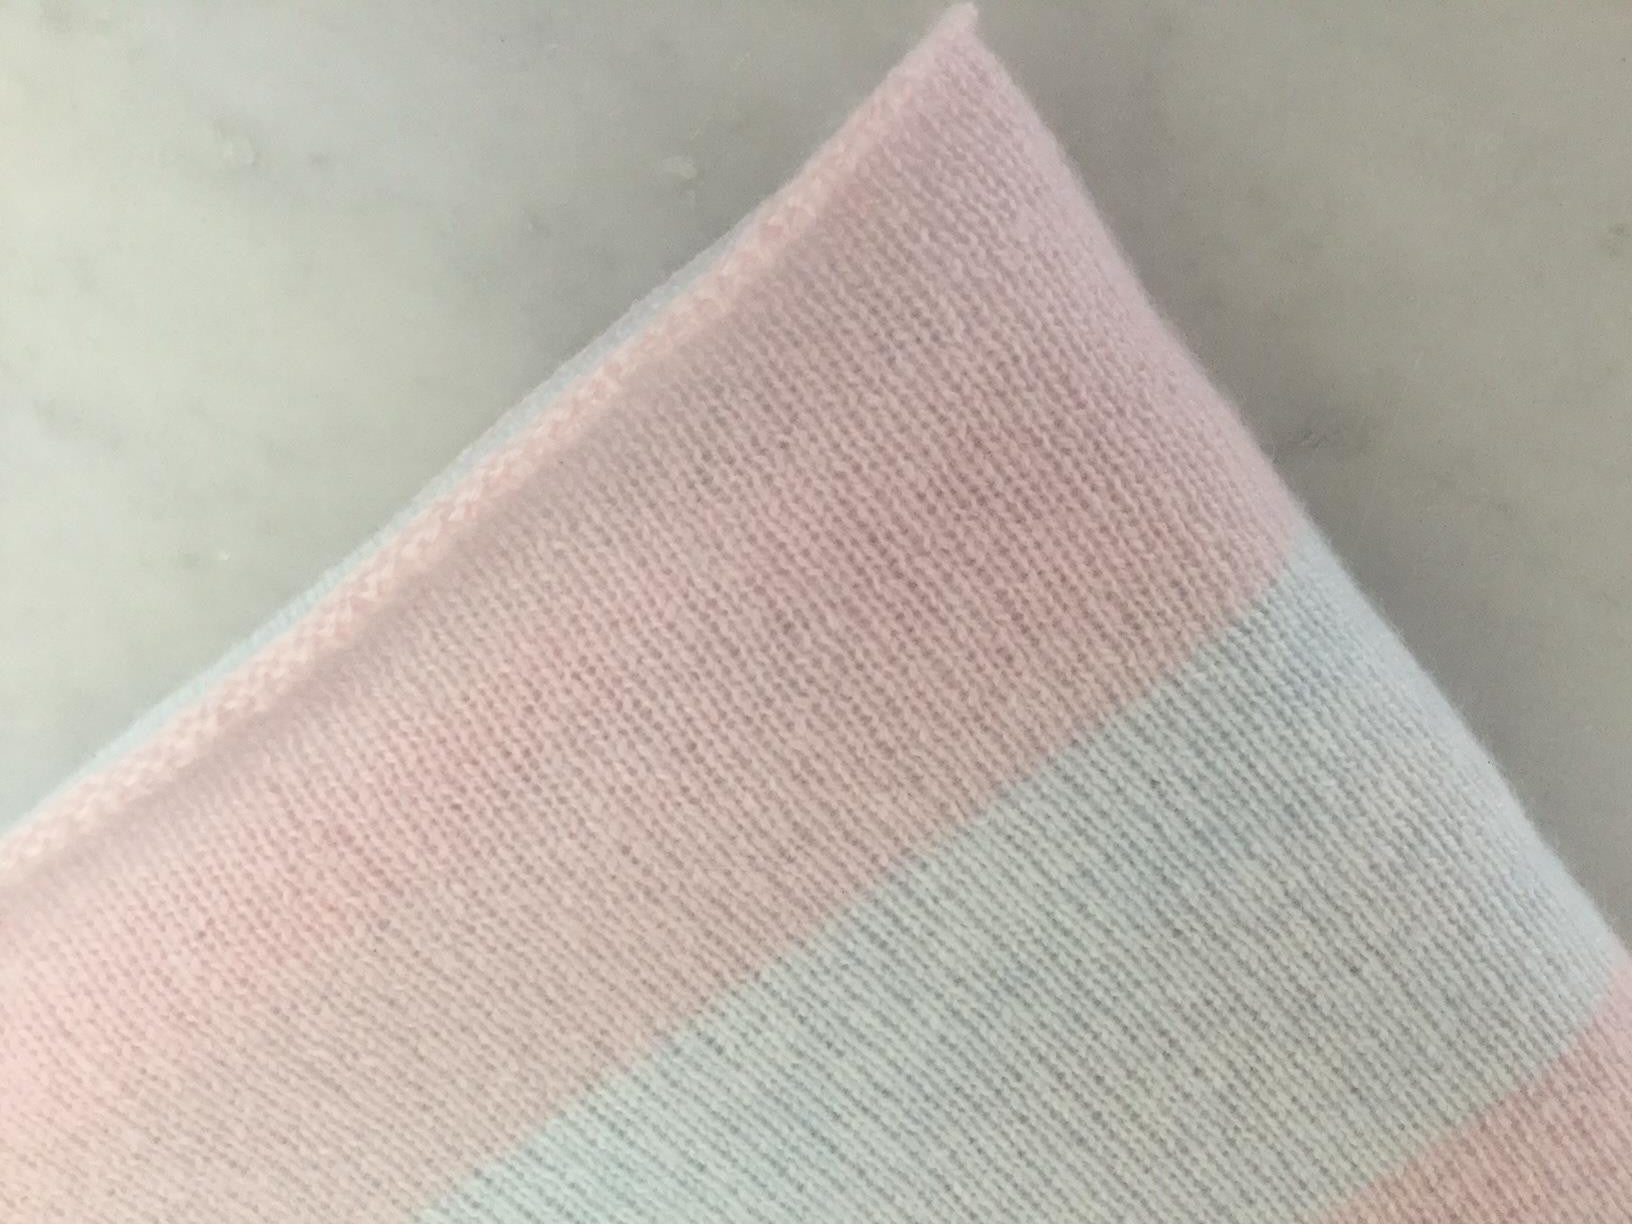 SCA Travelwrap - Ice Blue & Cherry Blossom Pink Striped